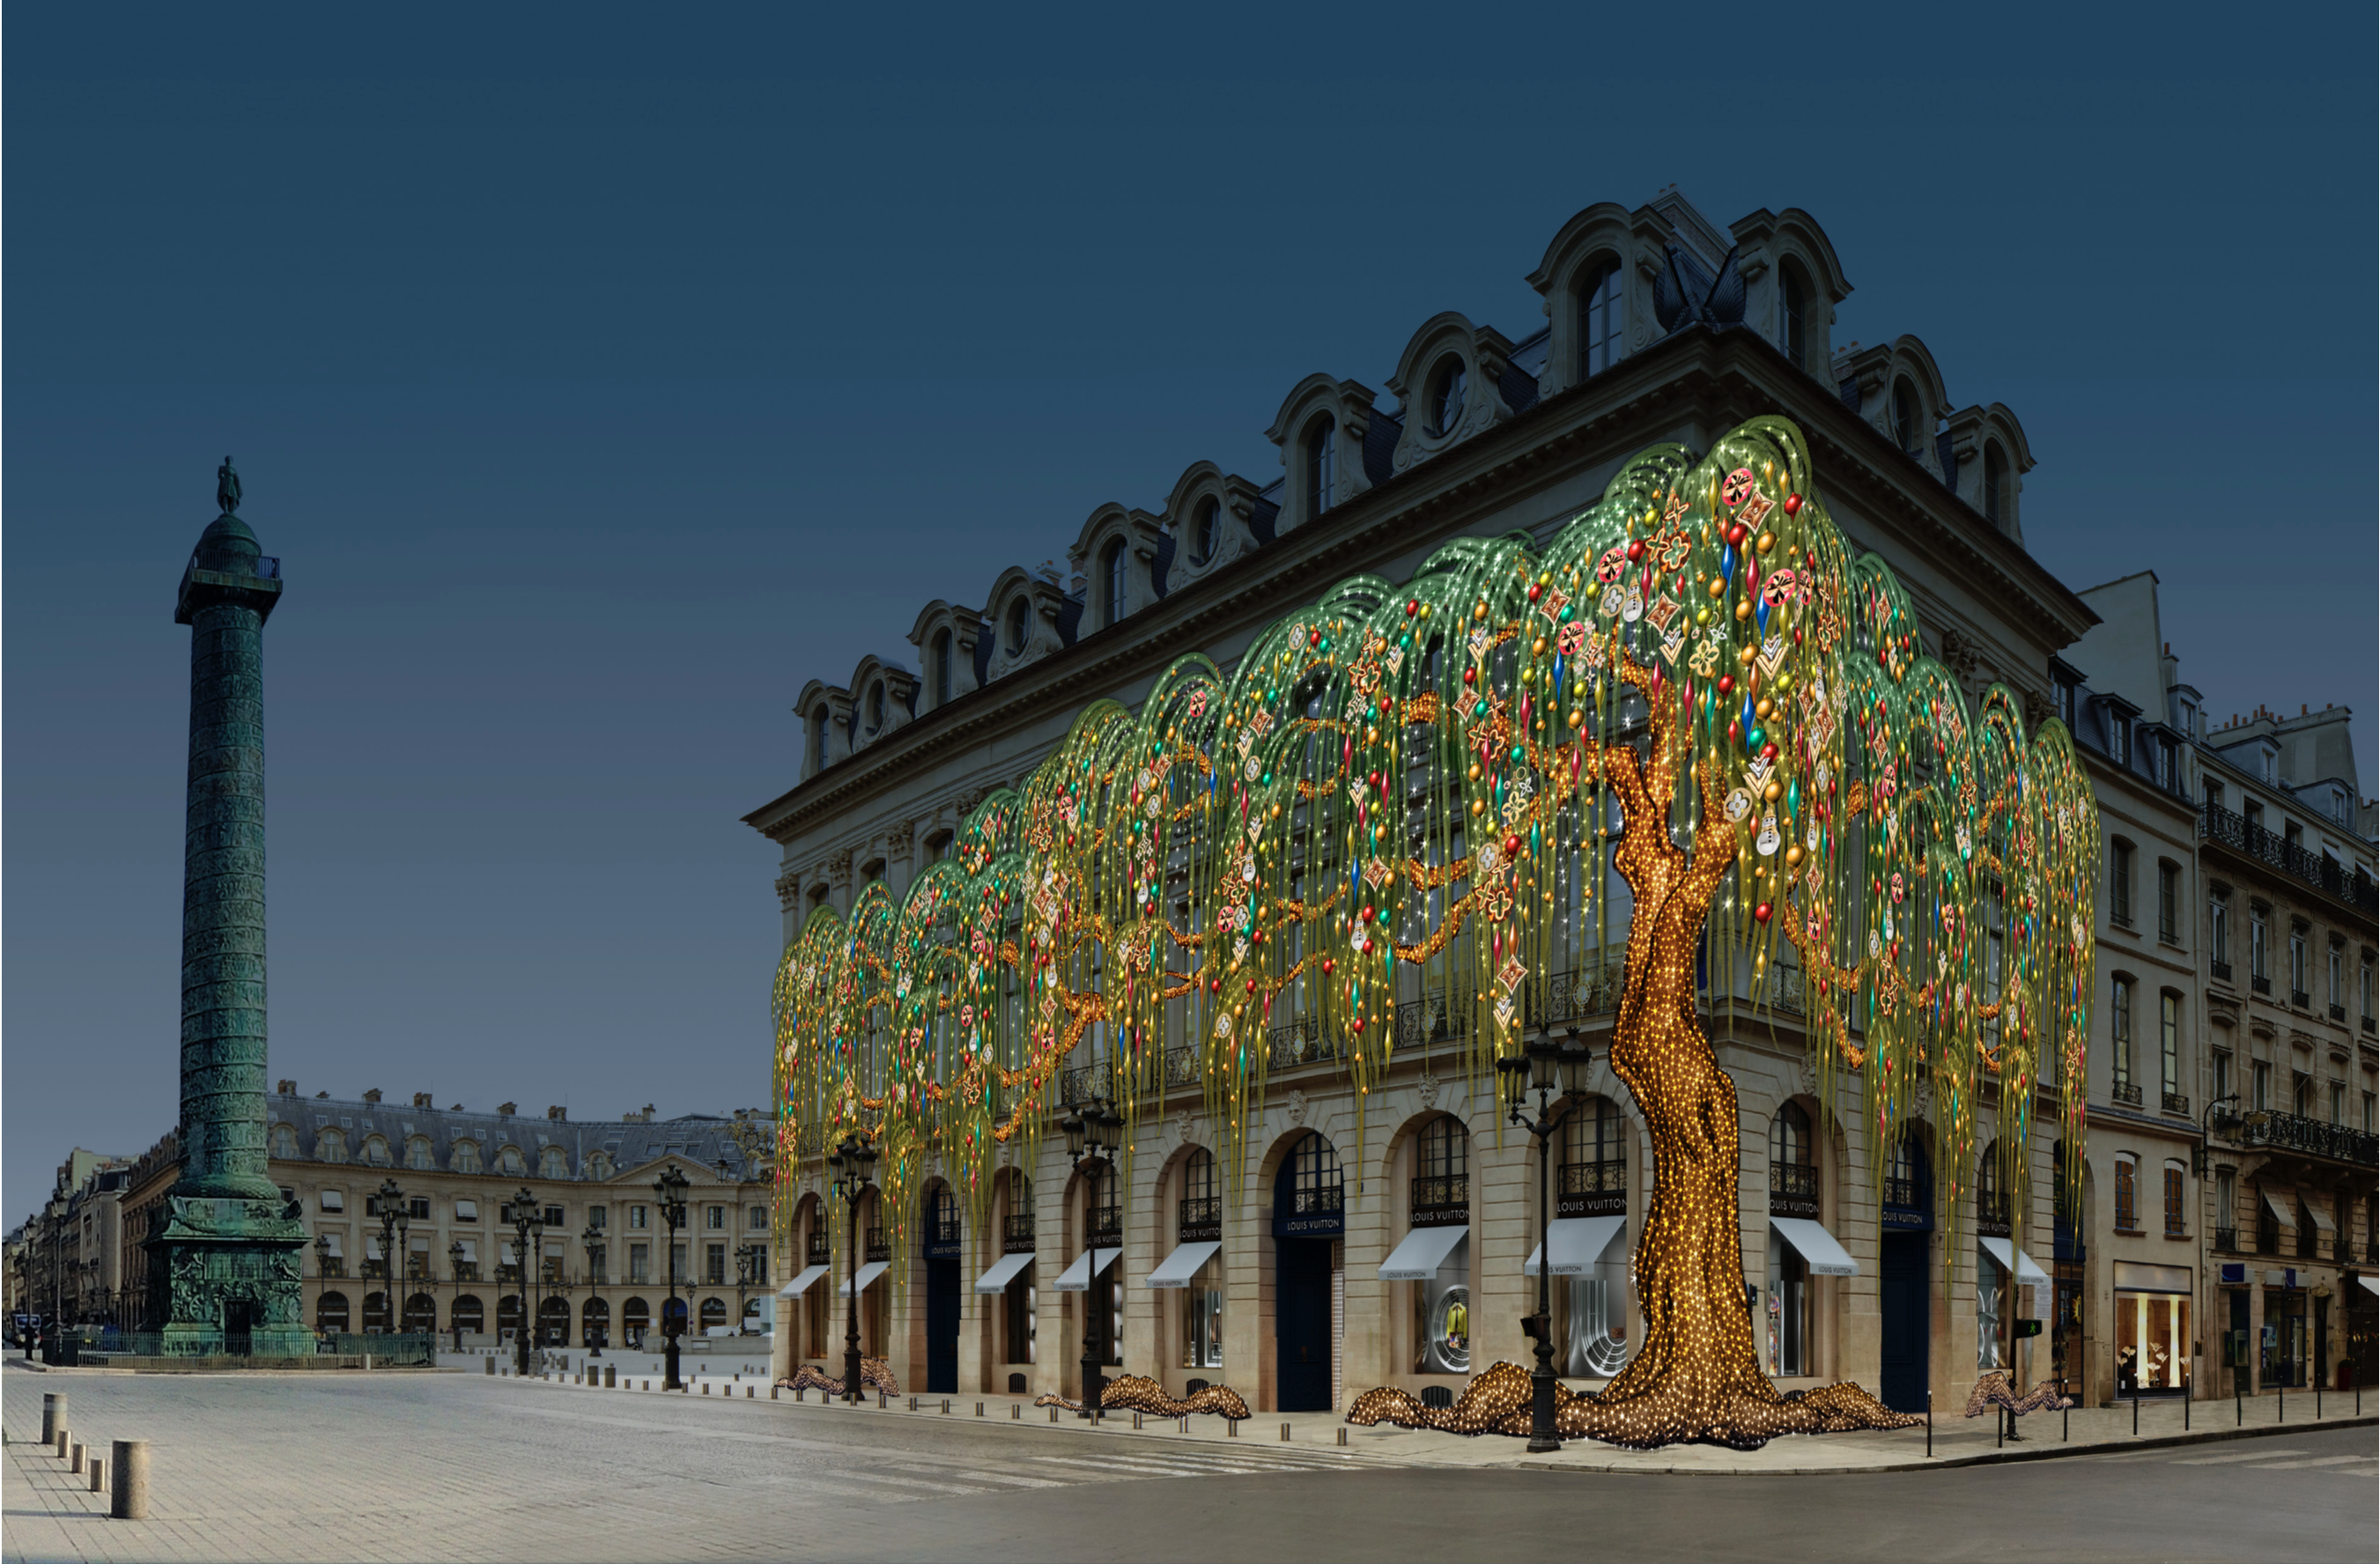 Louis Vuitton Trees of the World